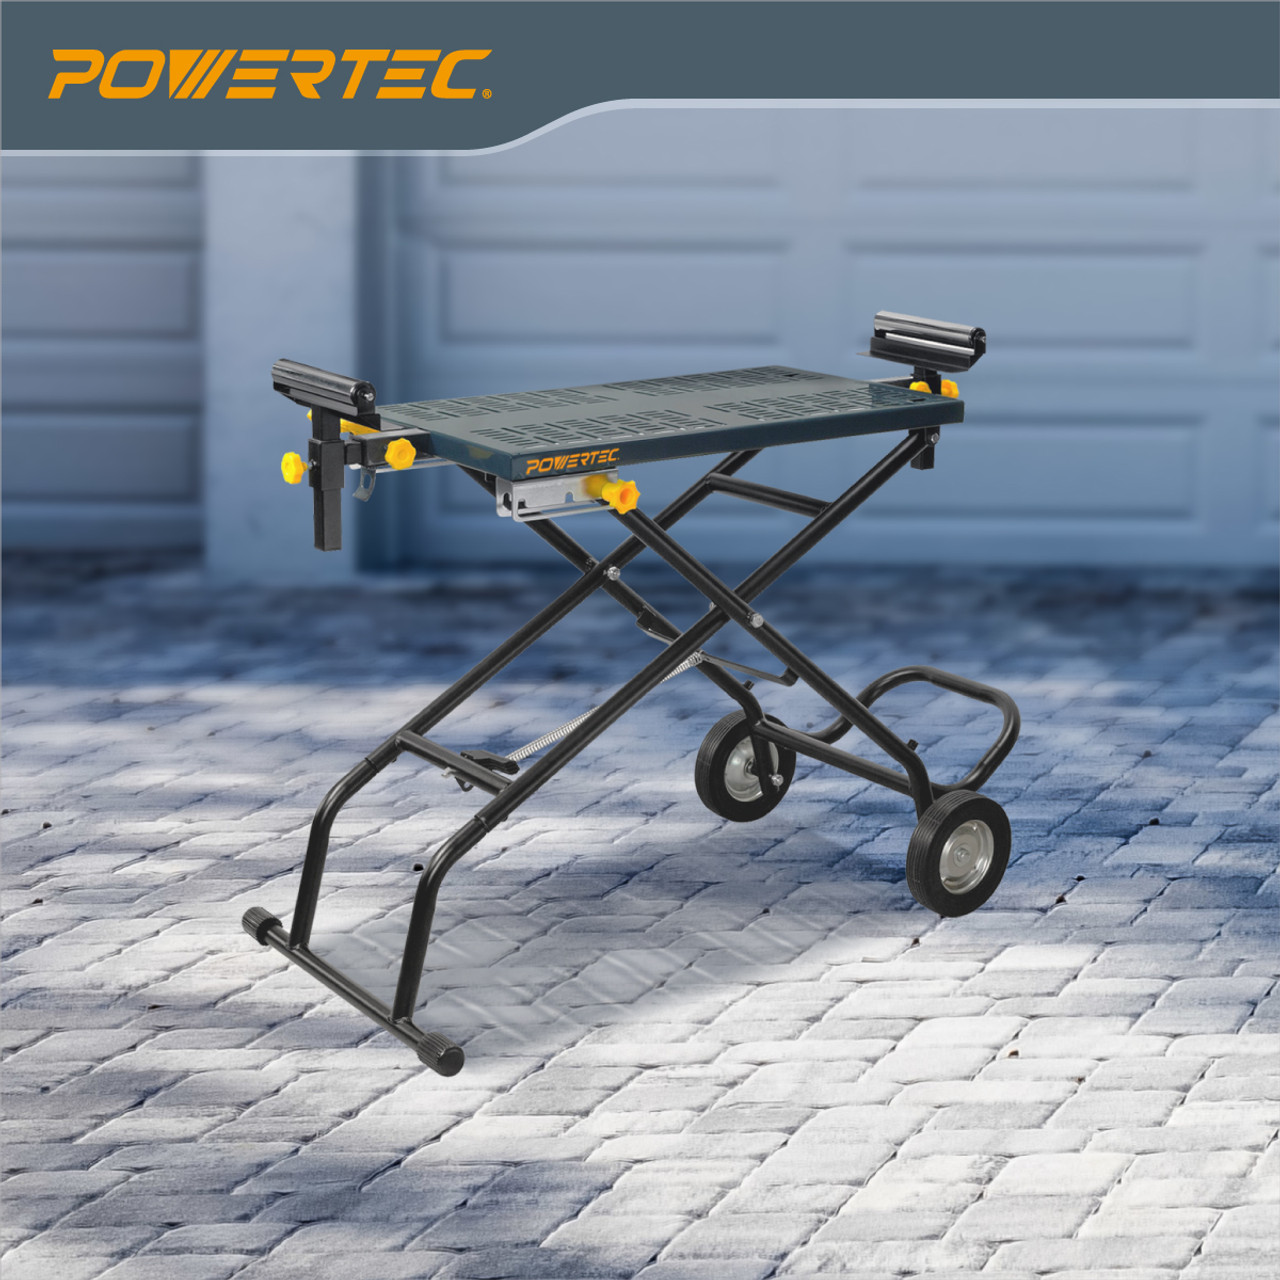 POWERTEC MT4000V Folding Miter Saw Stand with 8-Inch Wheels and 110V Power Outlets, Universal Quick-Release Brackets - 1